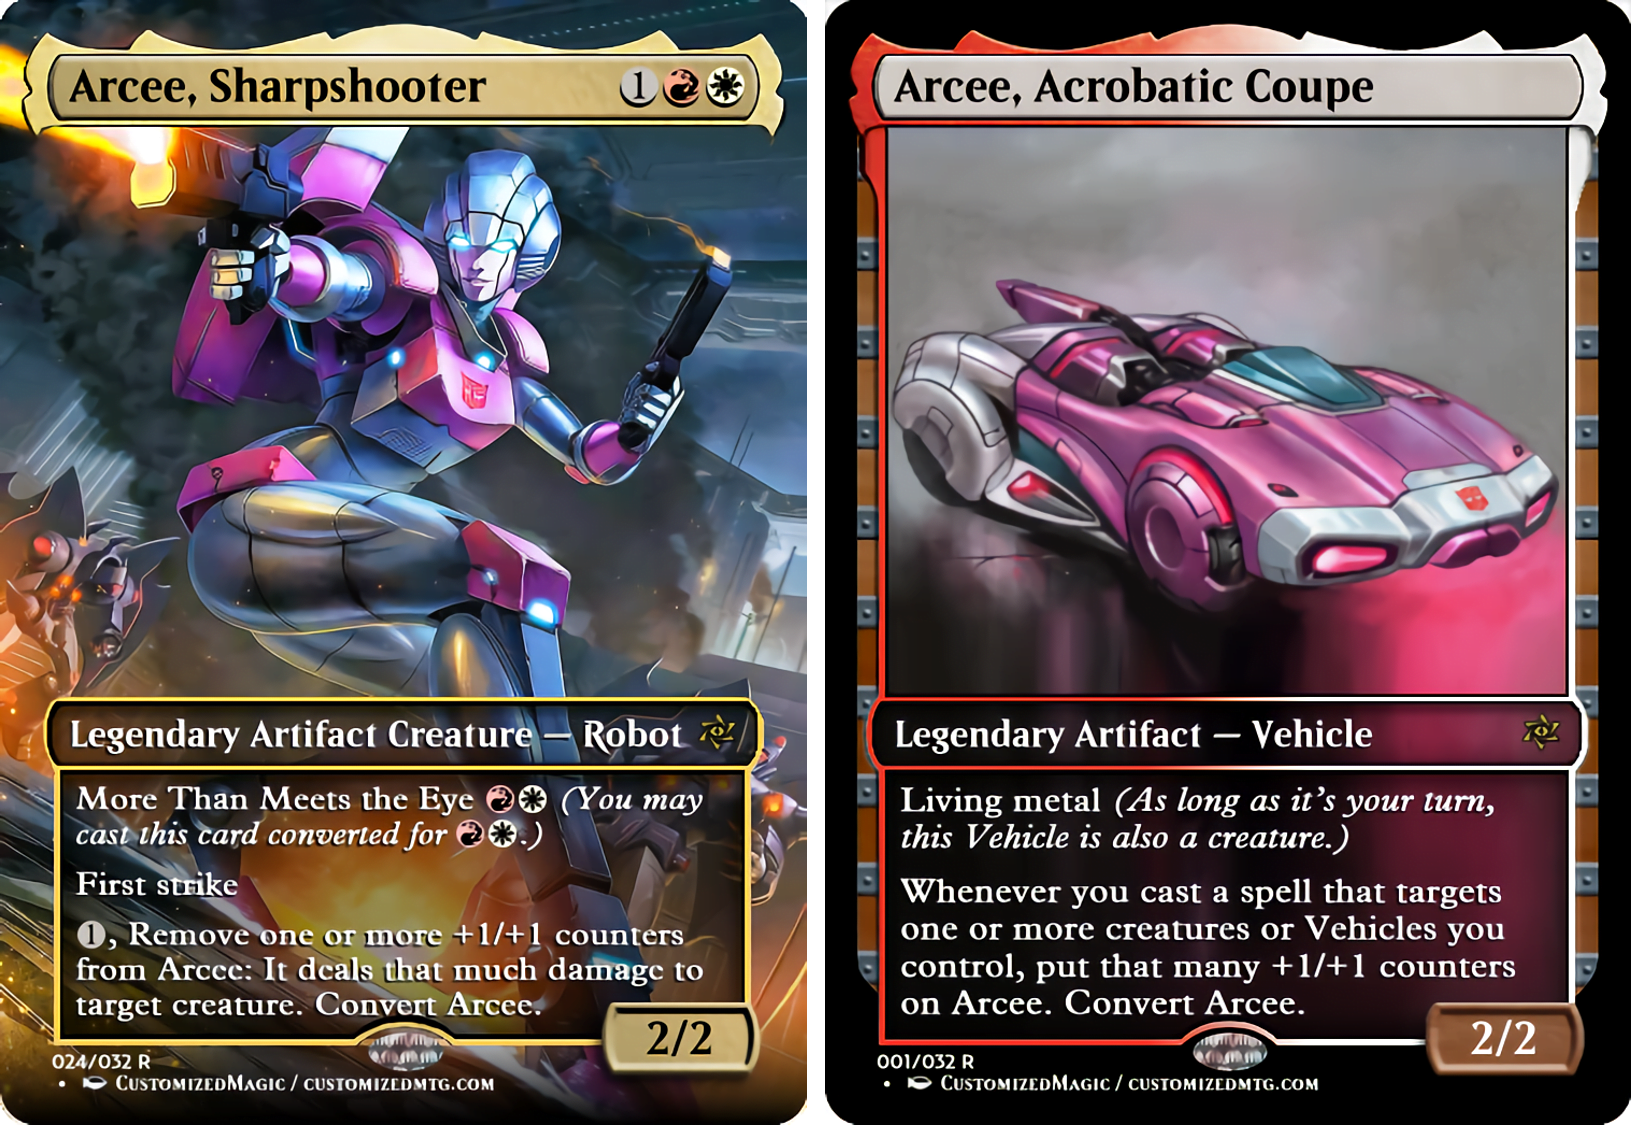 Transformers Commander Set | Arcee Sharpshooter and Arcee Acrobatic Coupe | Magic the Gathering Proxy Cards